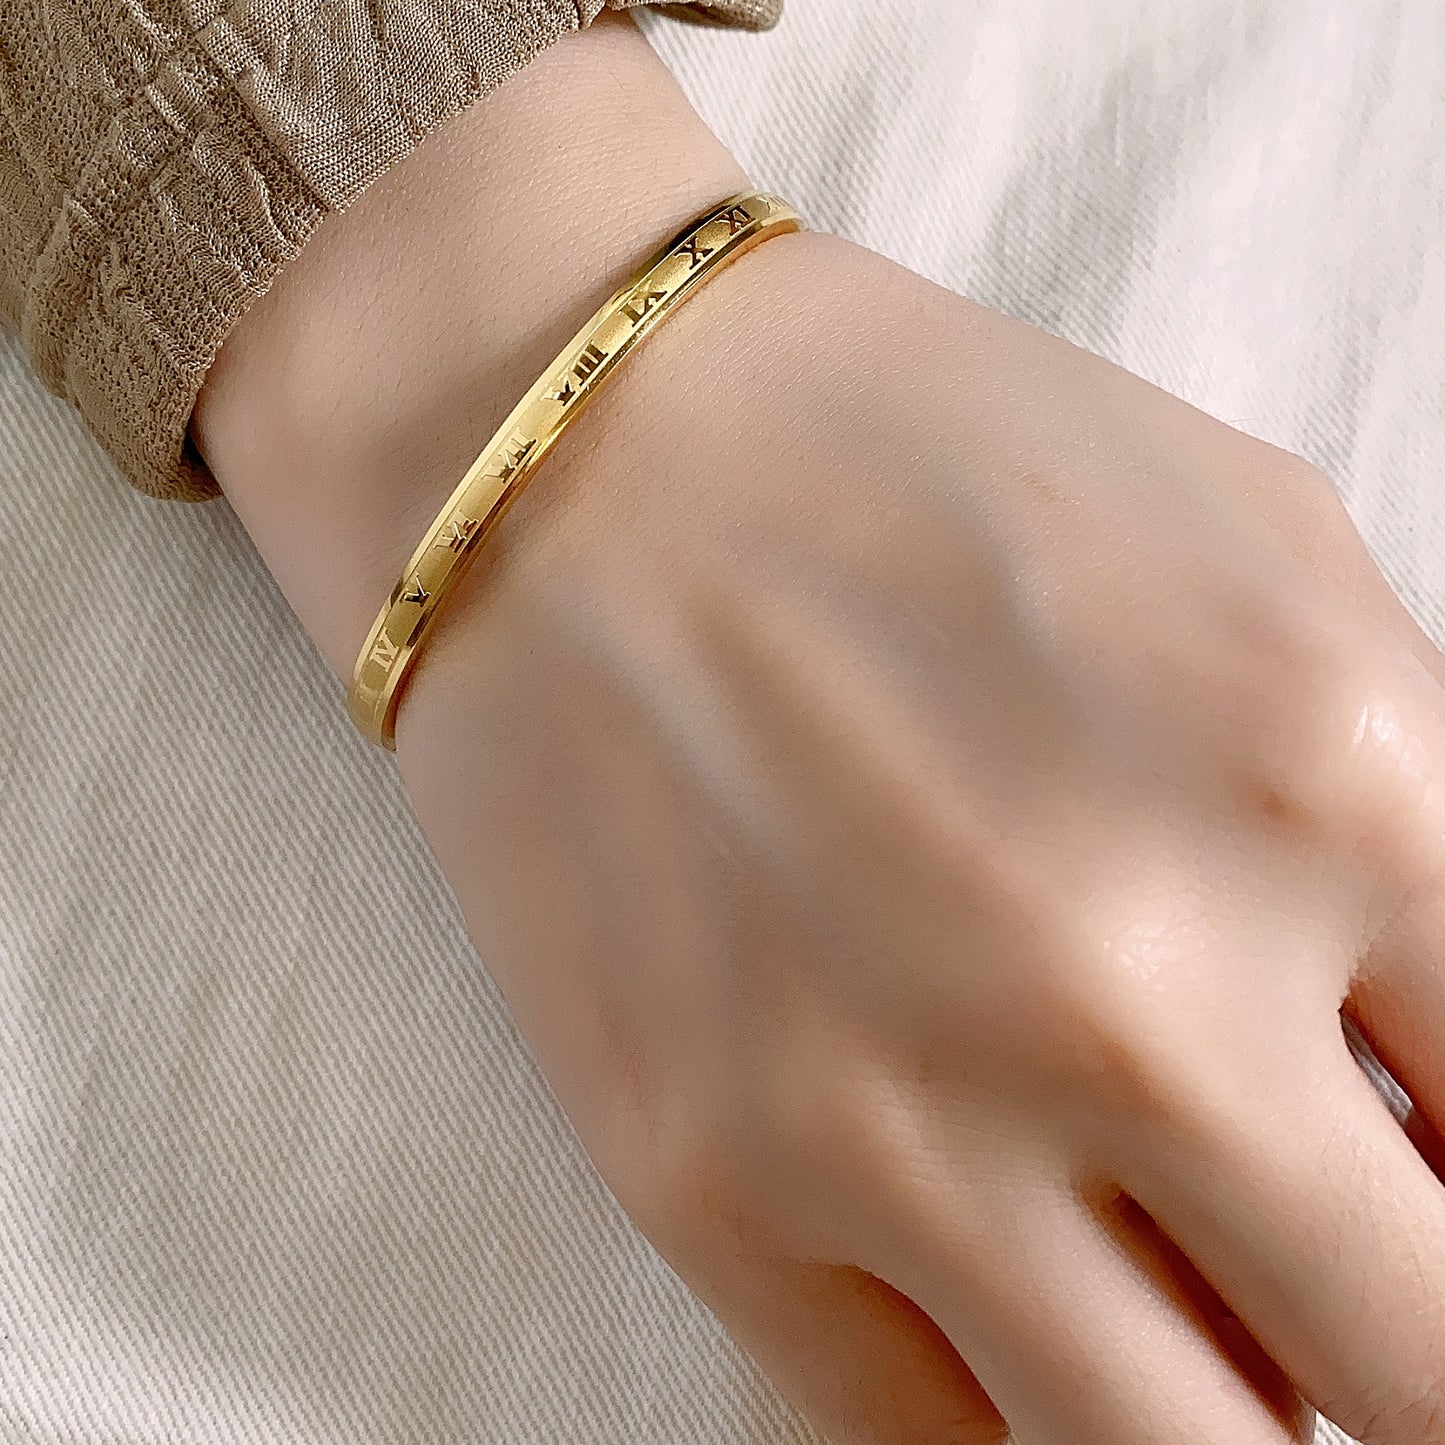 Roman Time Rounded Edge Bangle 4mm - Gold